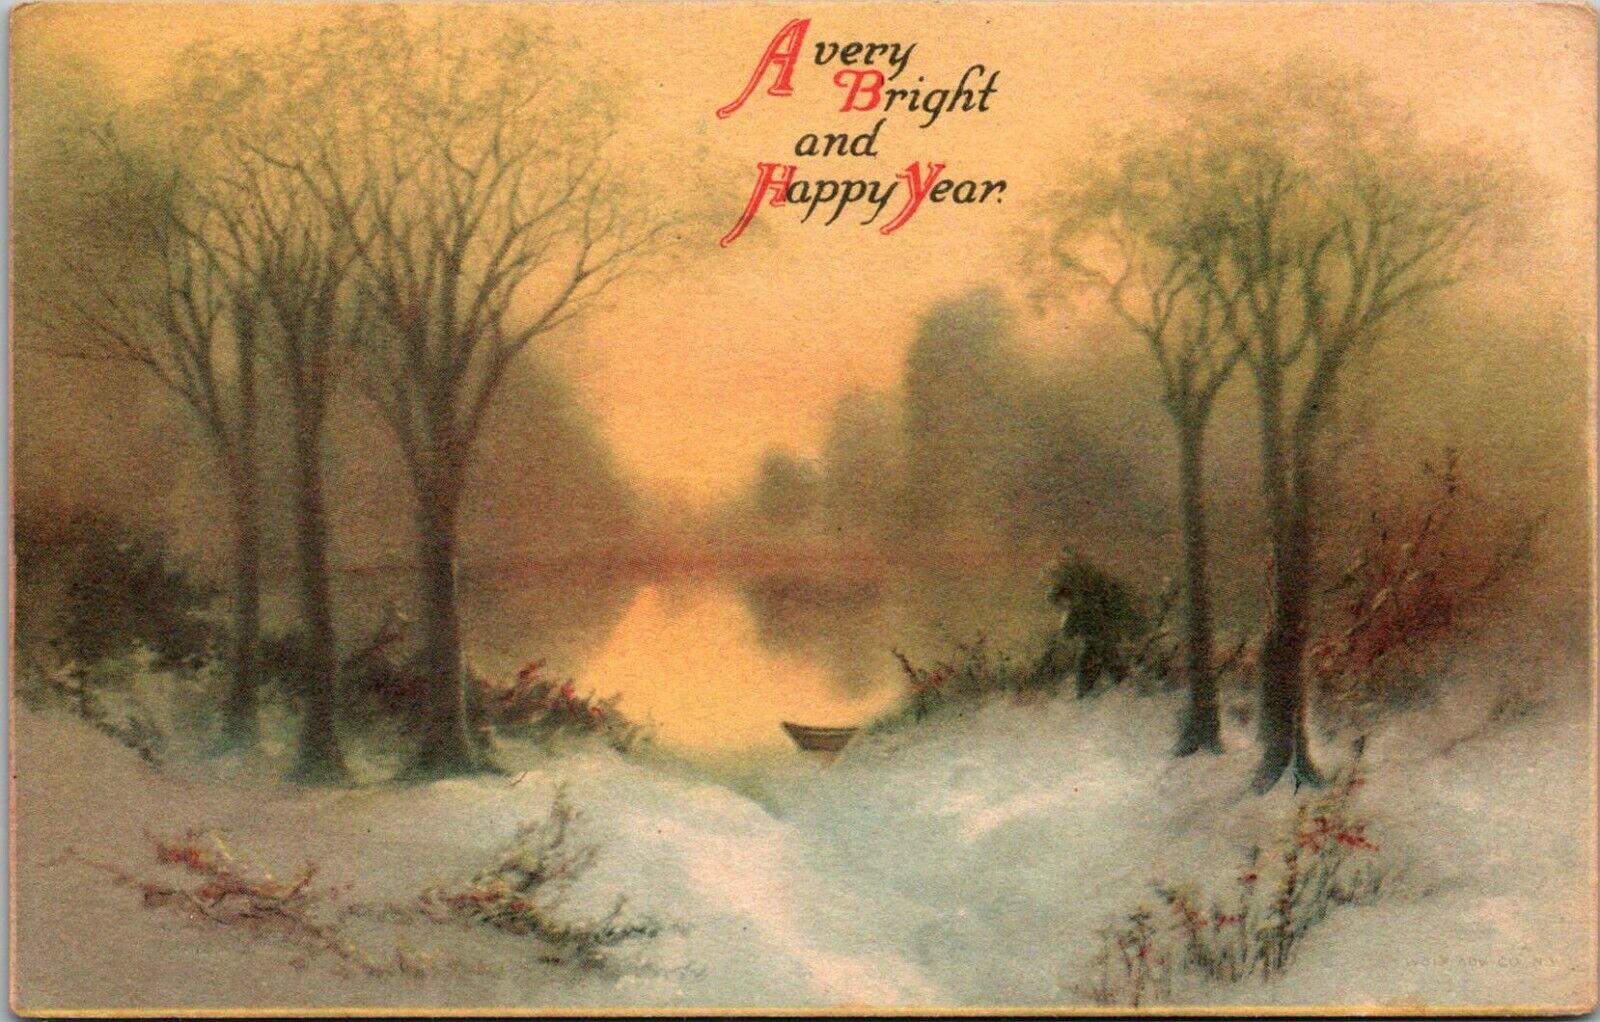 Vintage Postcard A Very Bright and Happy Year Greeting 